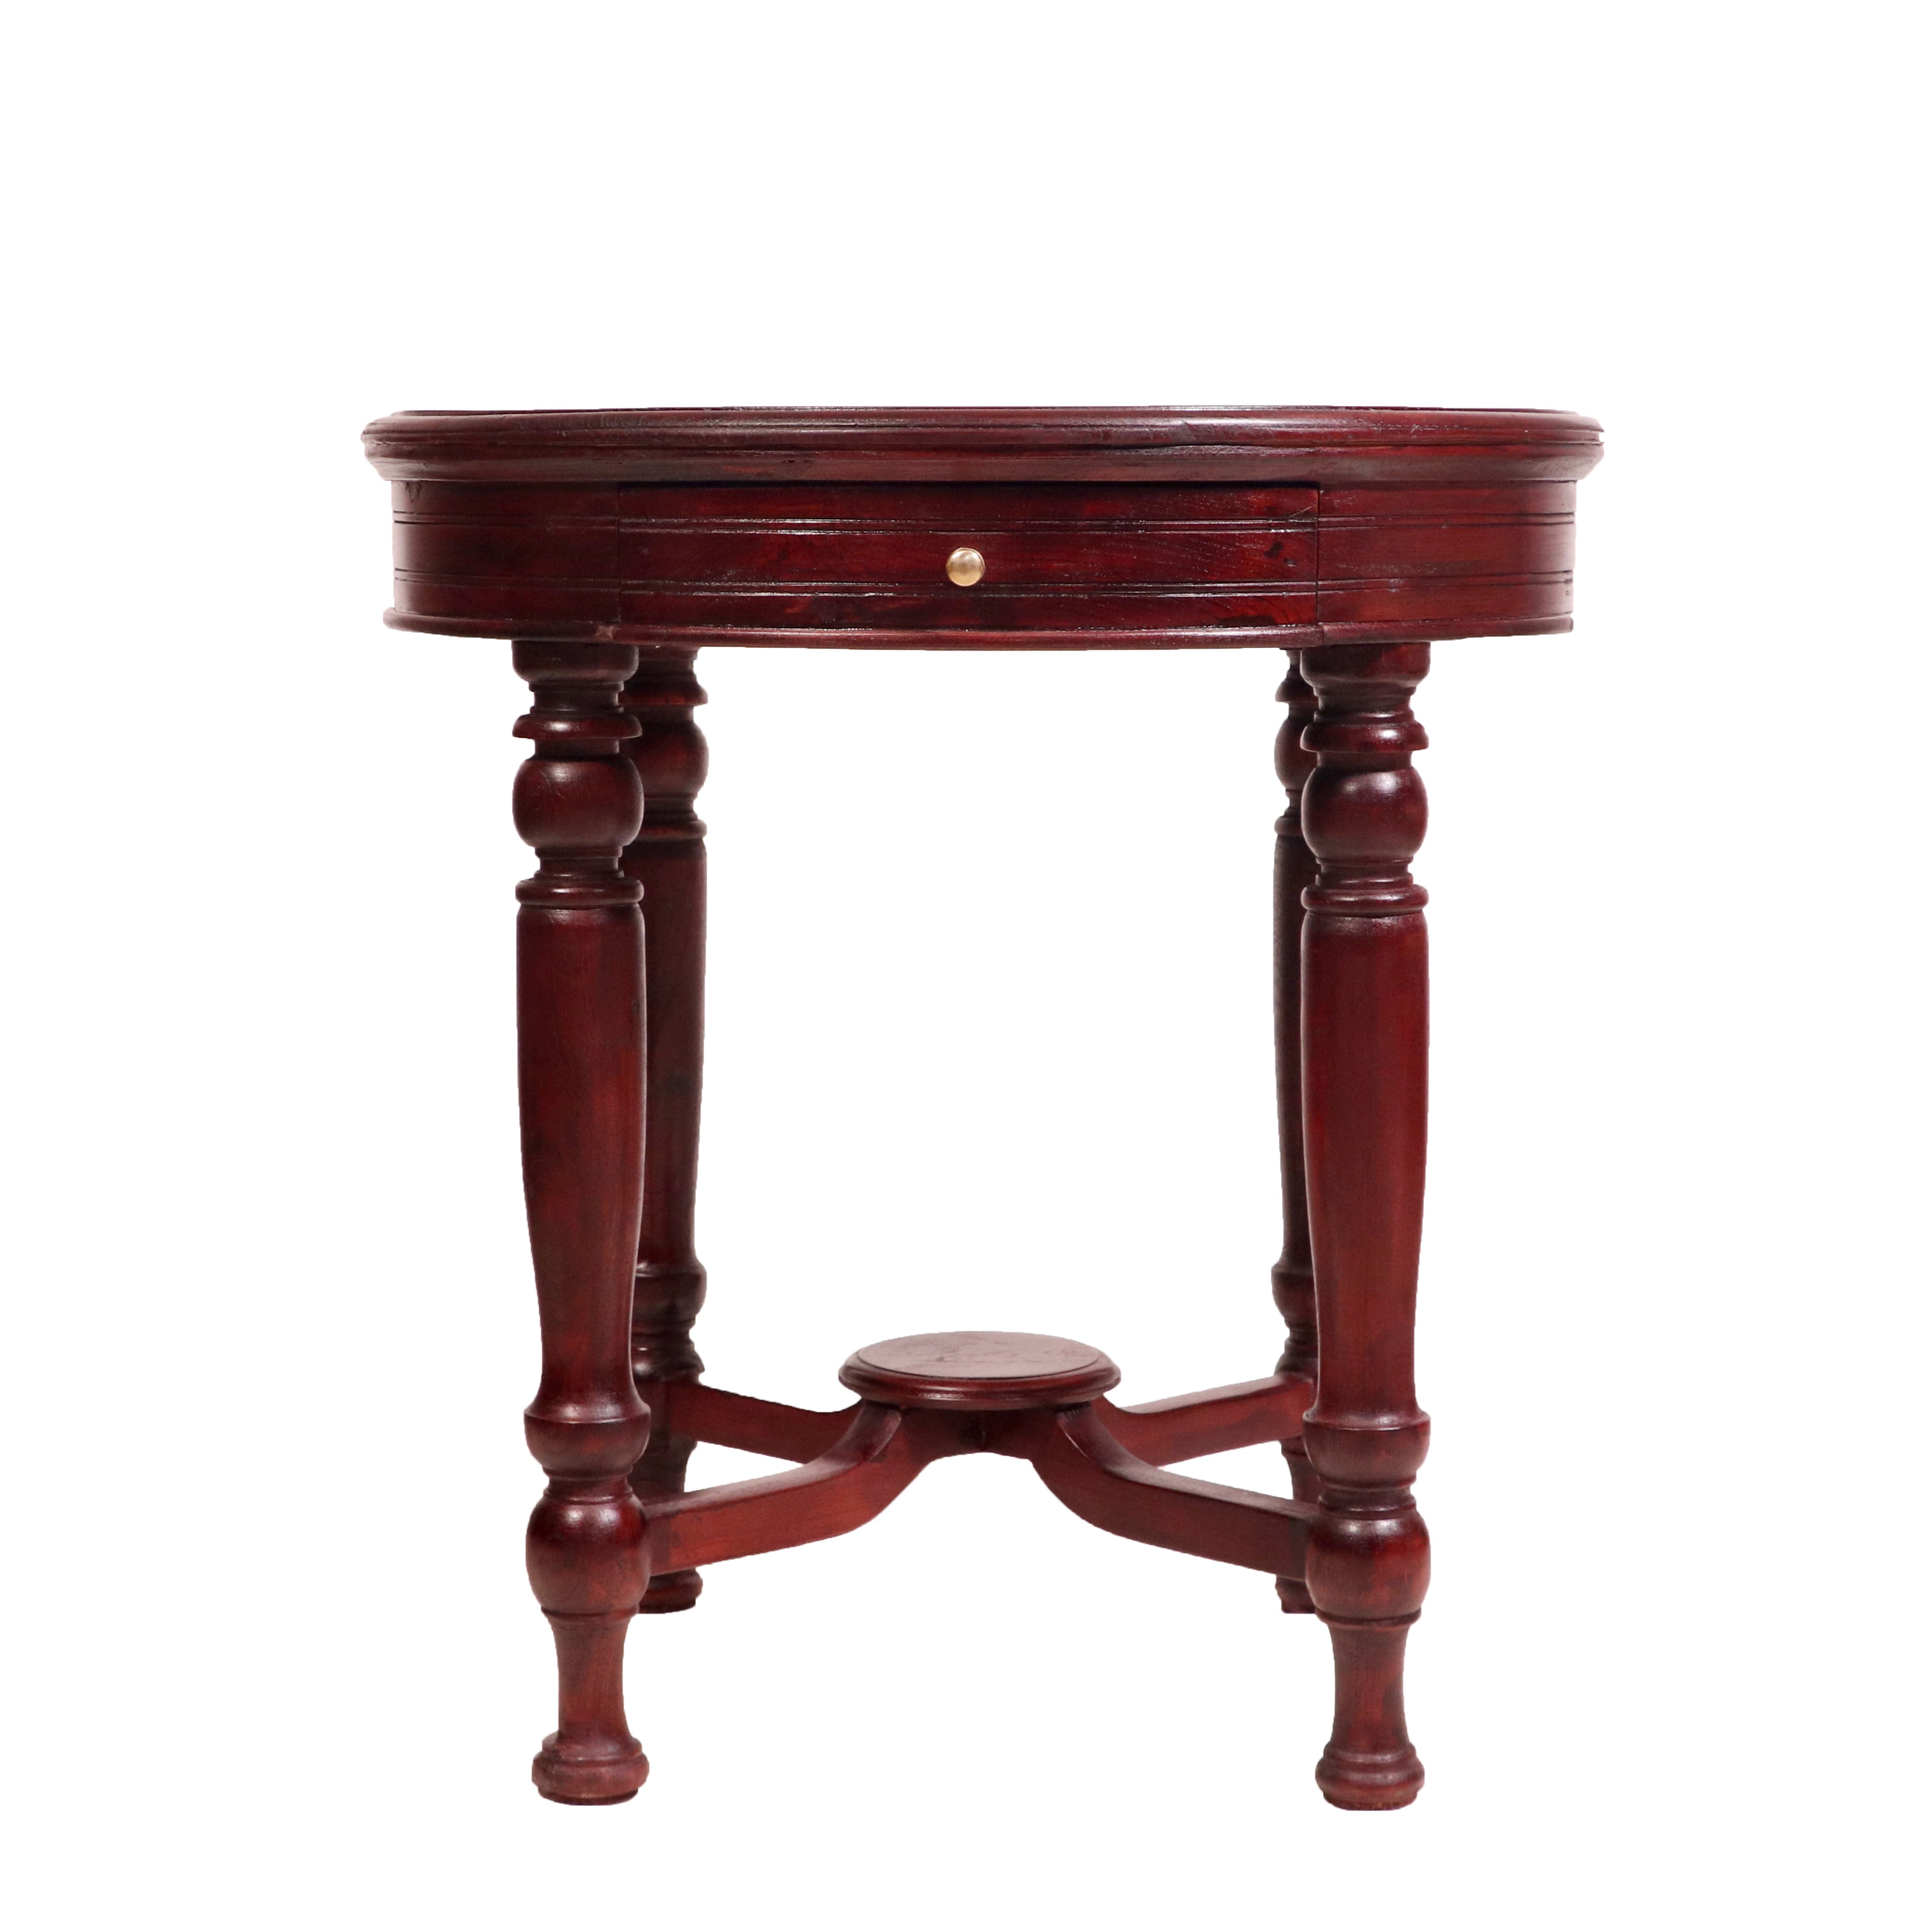 Classic Teak round Table with Drawer End Table